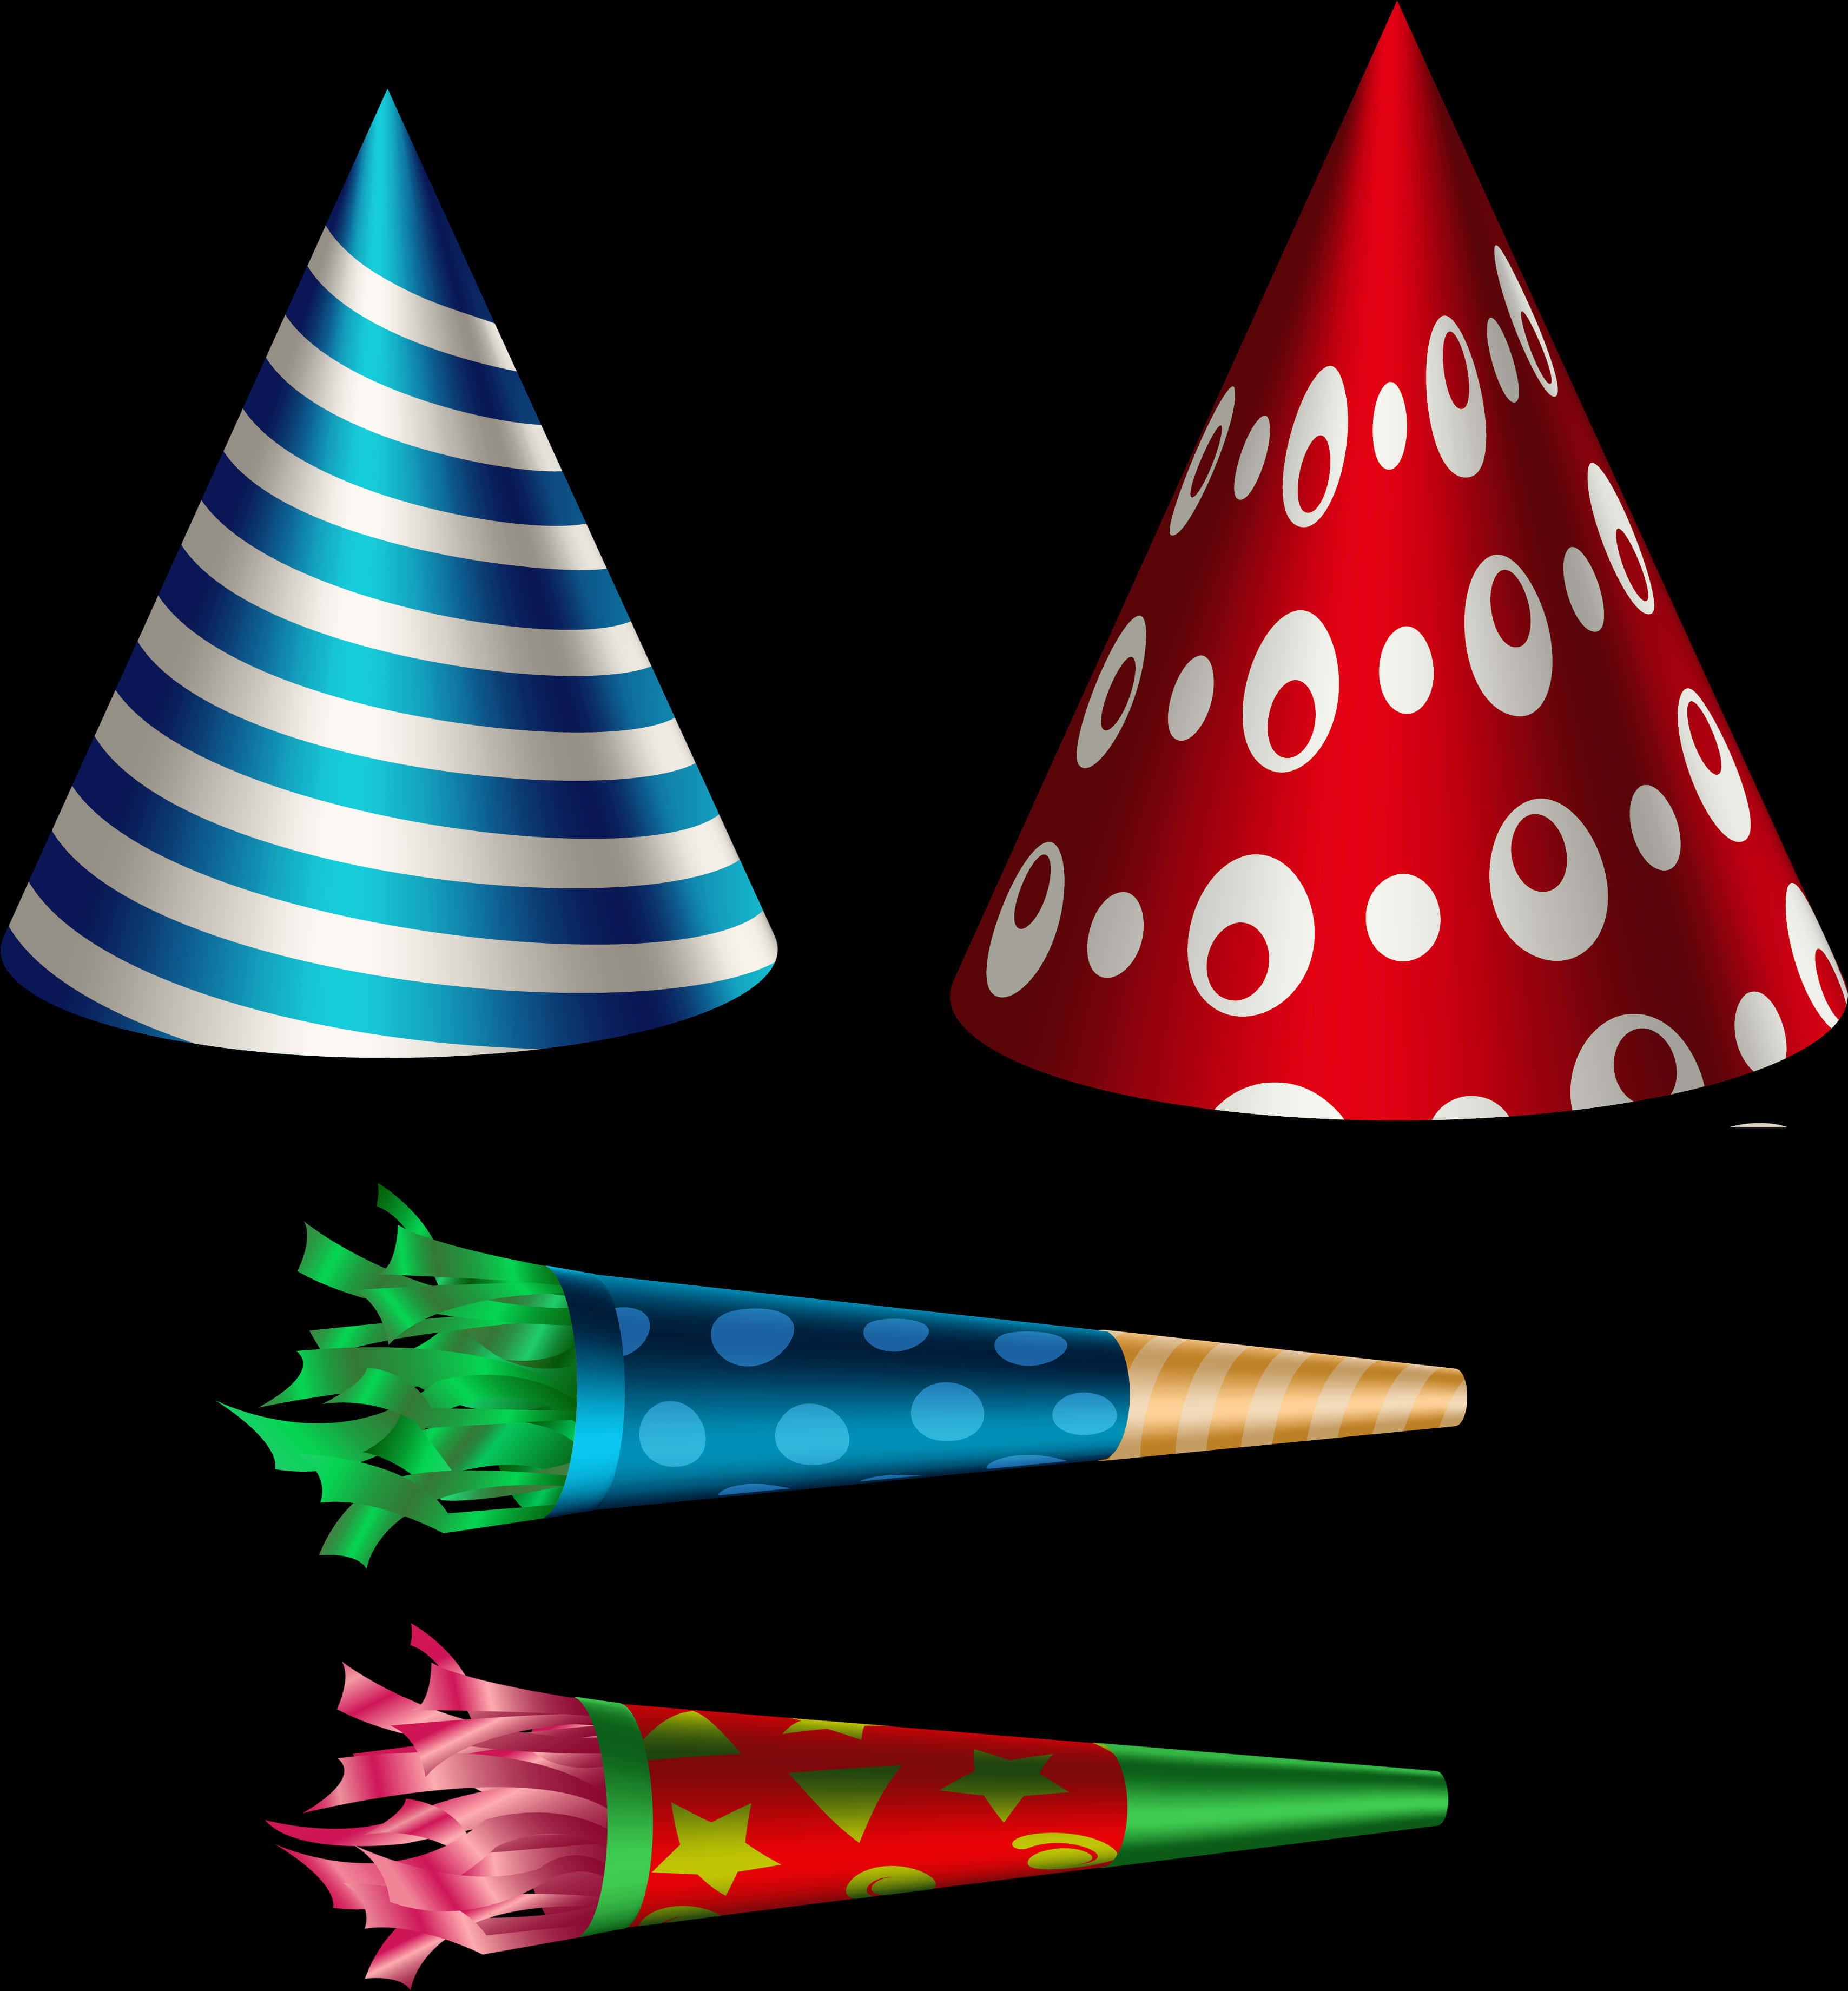 A Group Of Colorful Party Hats